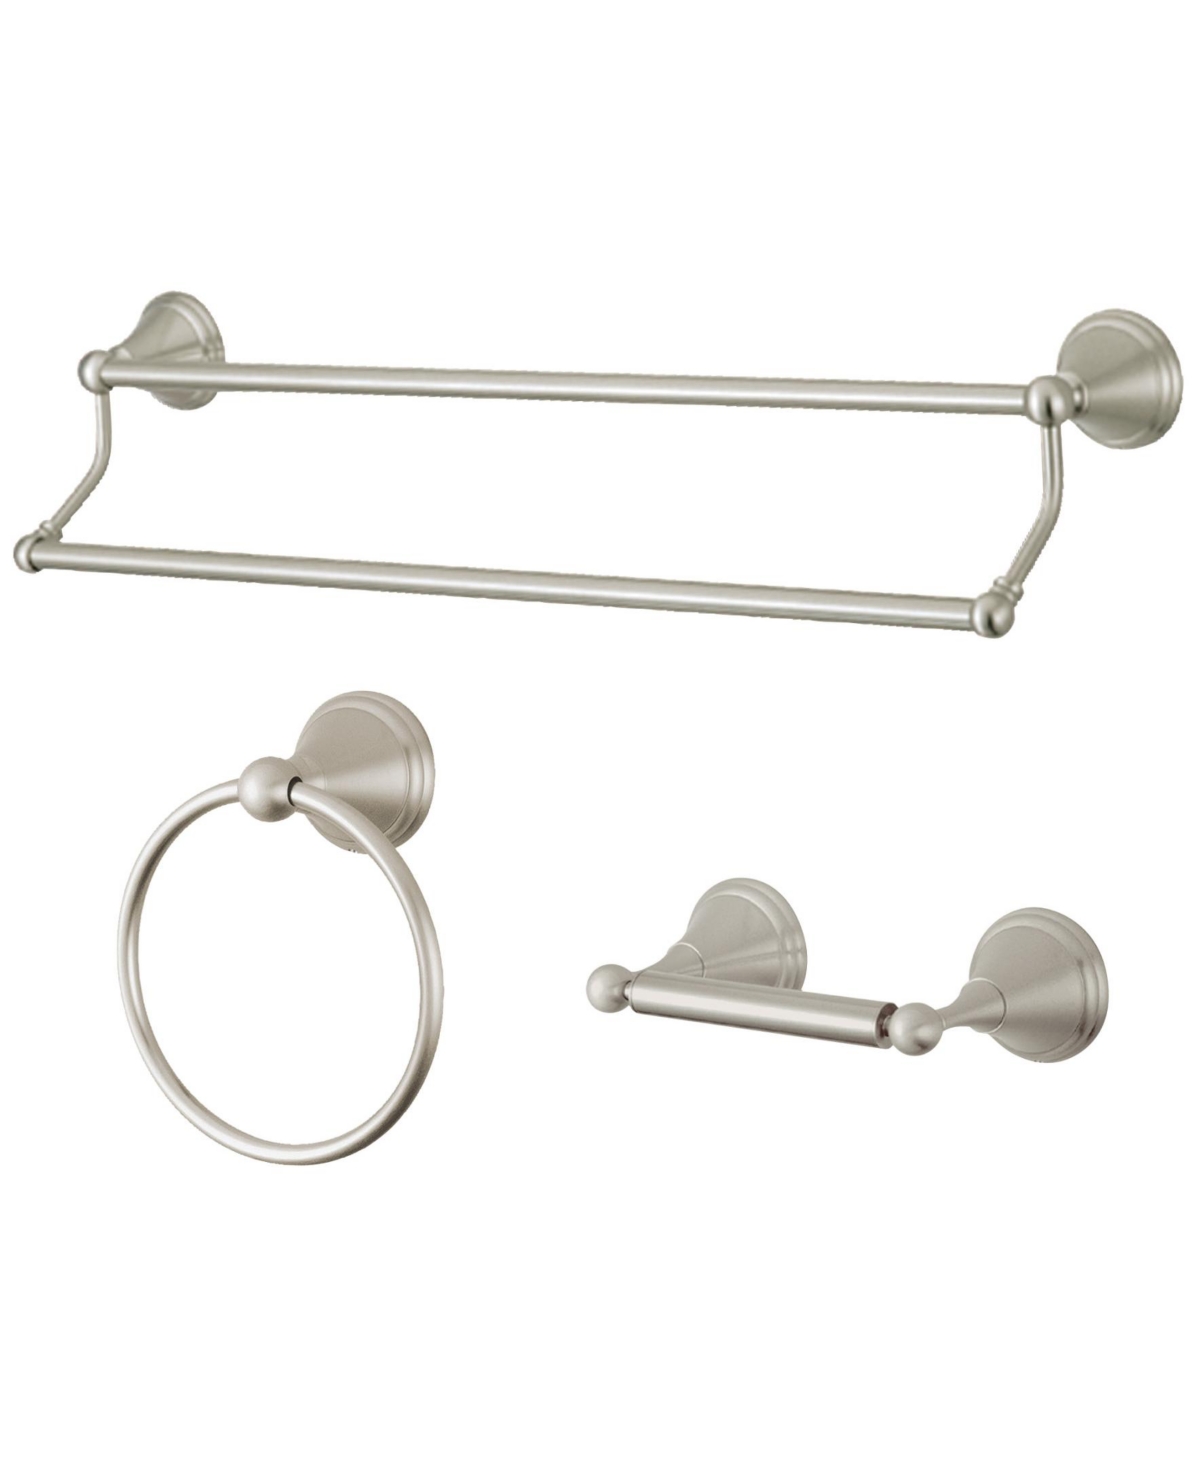 Kingston Brass Governor 3-Pc. Bathroom Accessories Set in Brushed Nickel Bedding